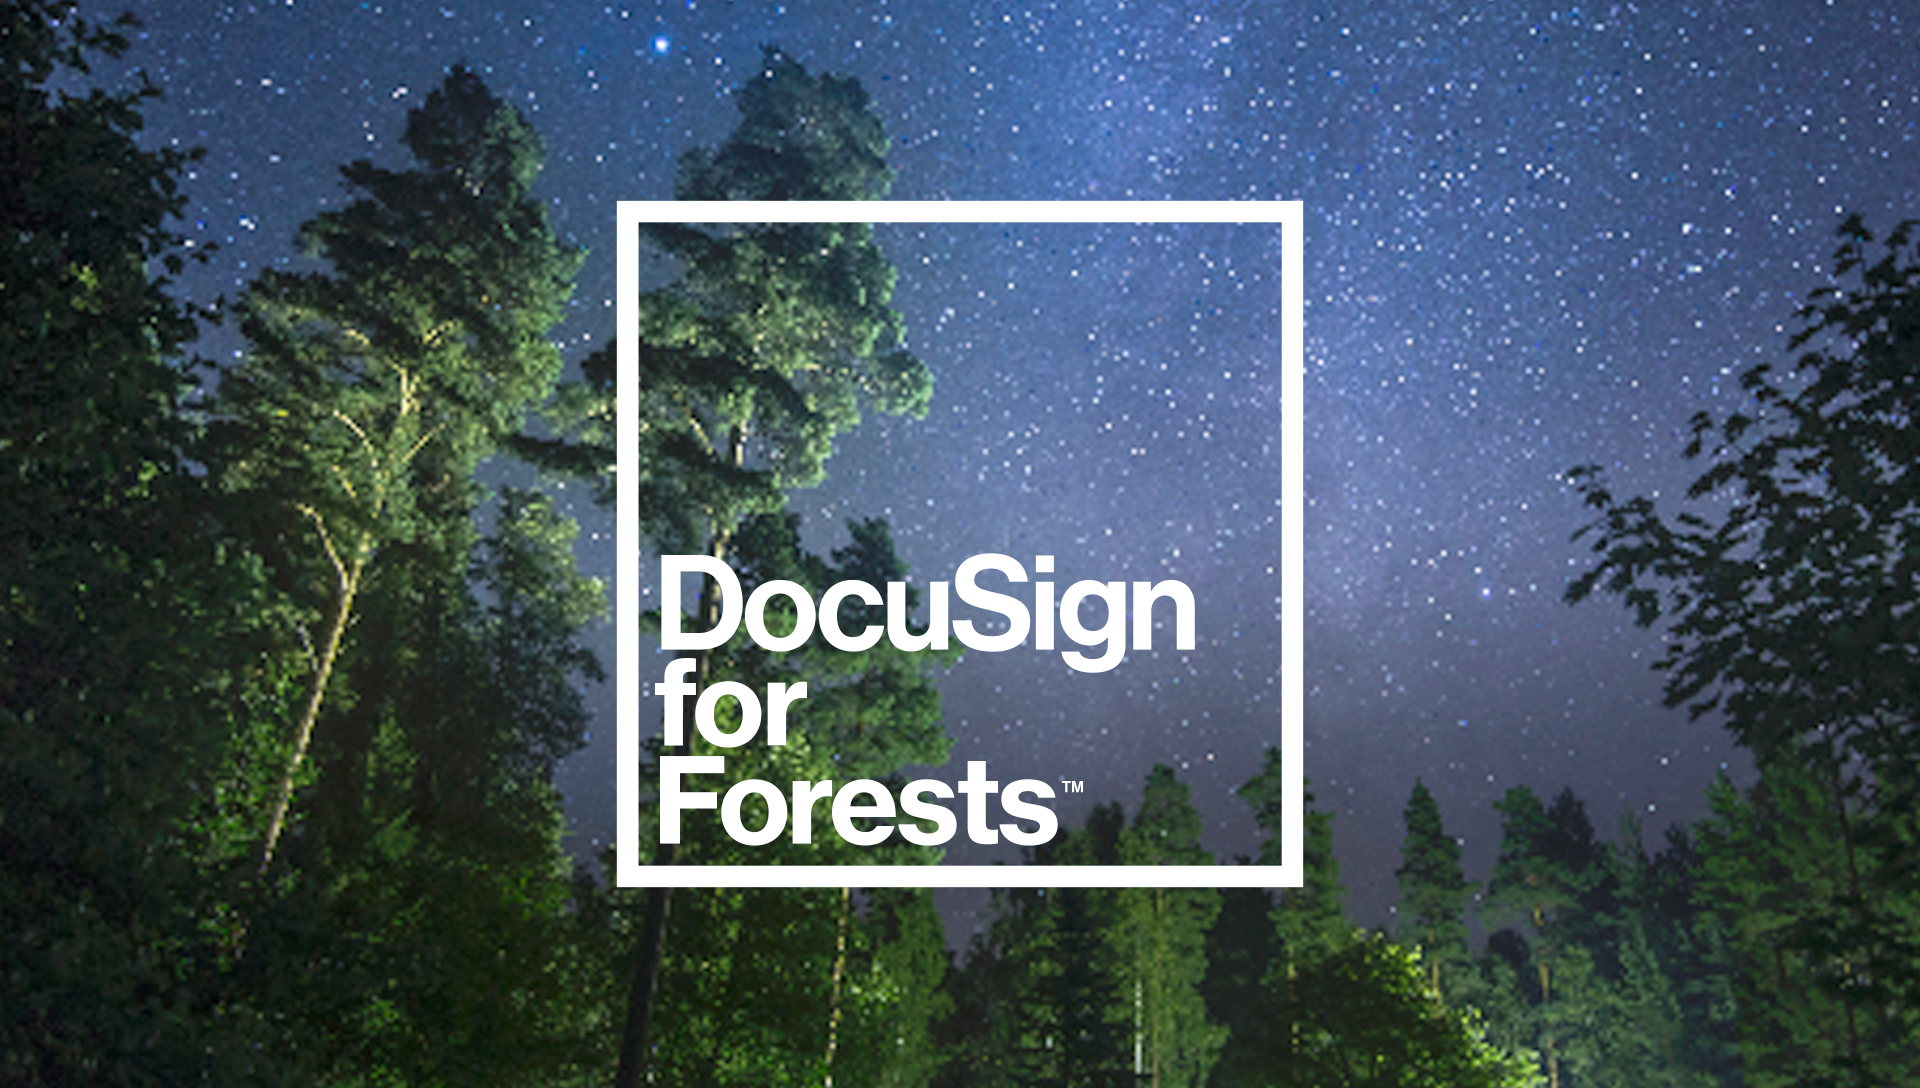 DocuSign for Forestsの静止画